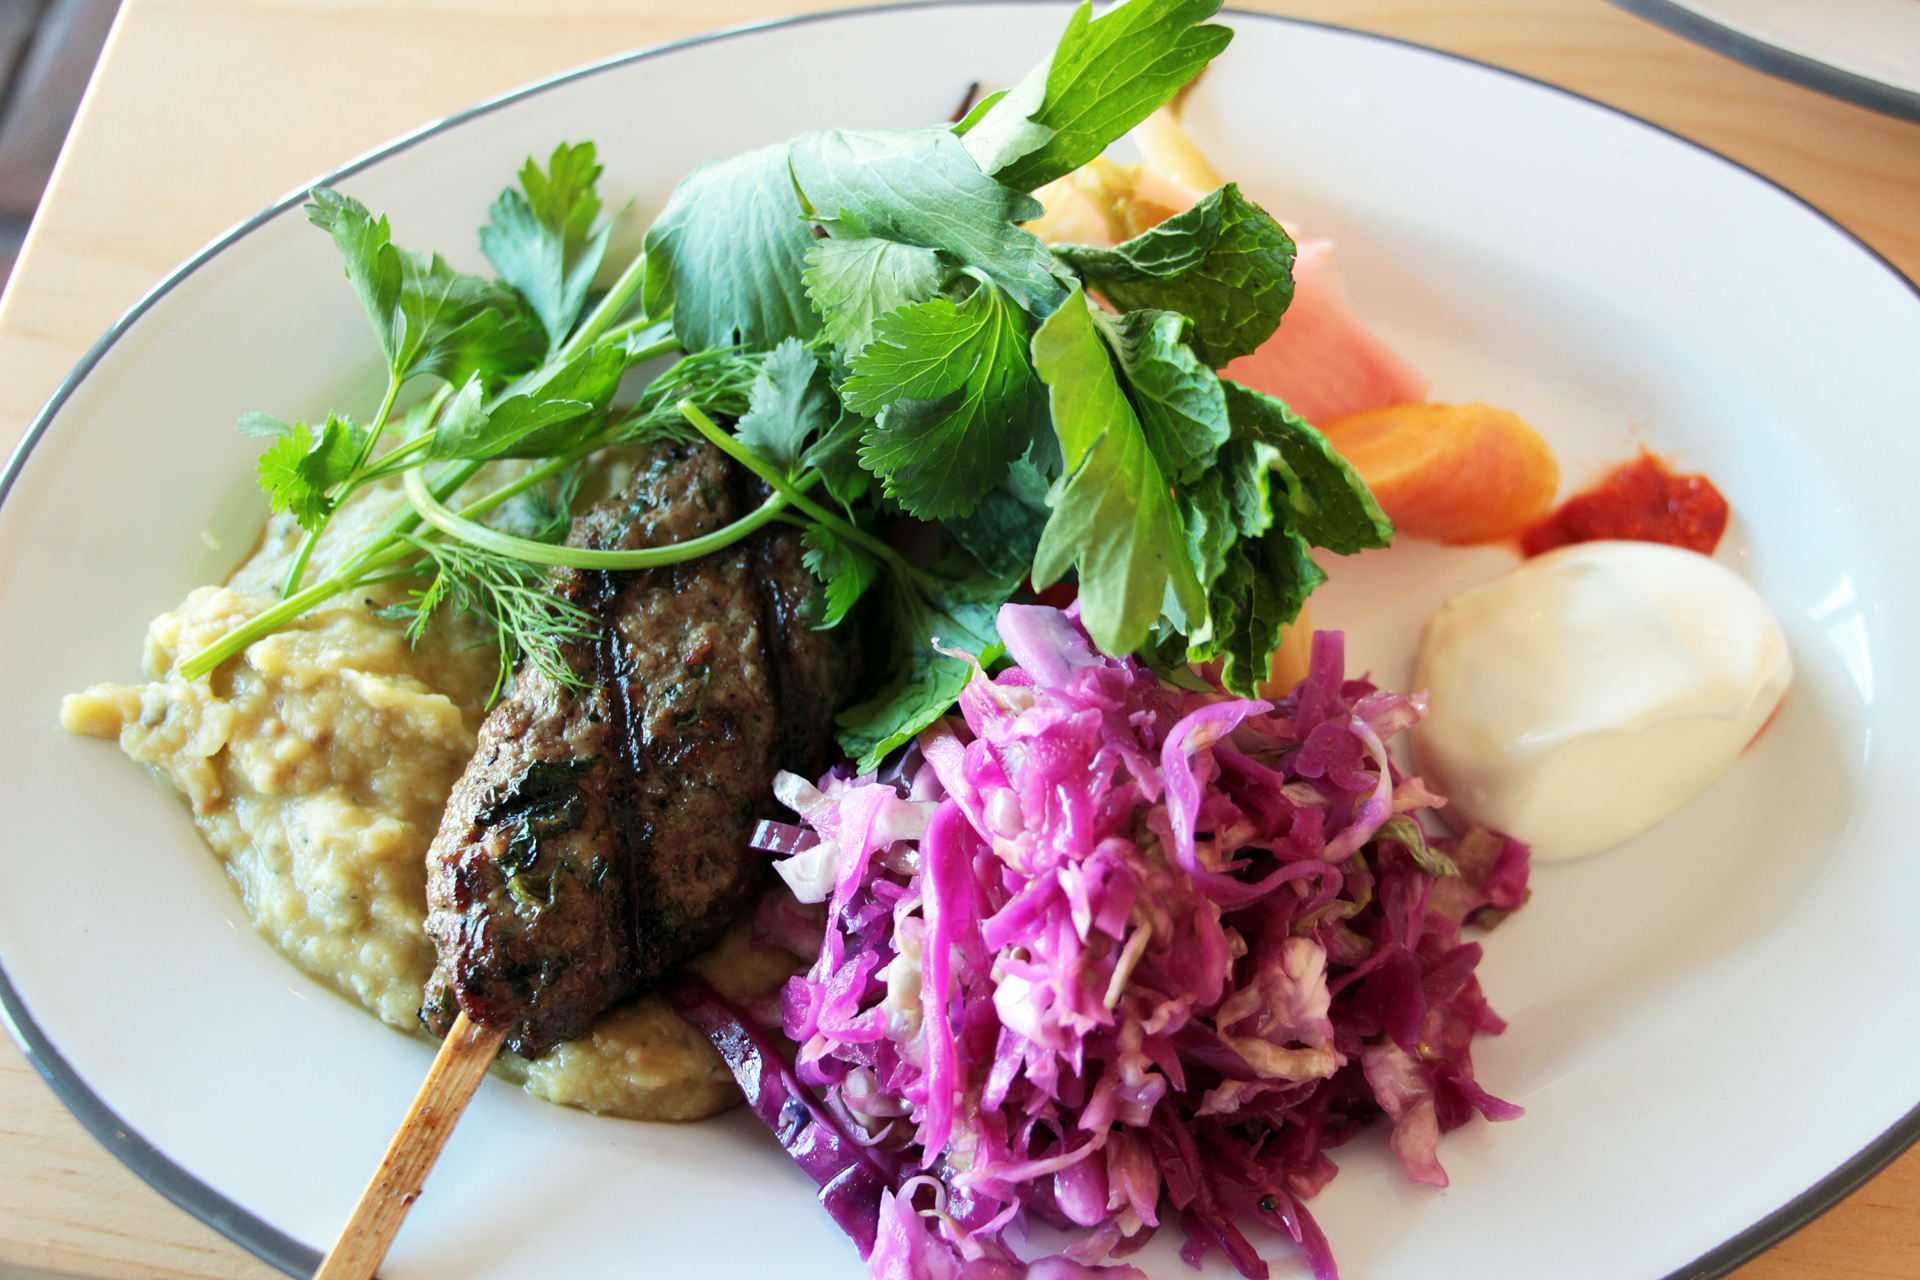 Lamb Kebab Plate with served with homemade purple-cabbage sauerkraut, mashed red lentils, and pickles of fennel, carrot and celery.